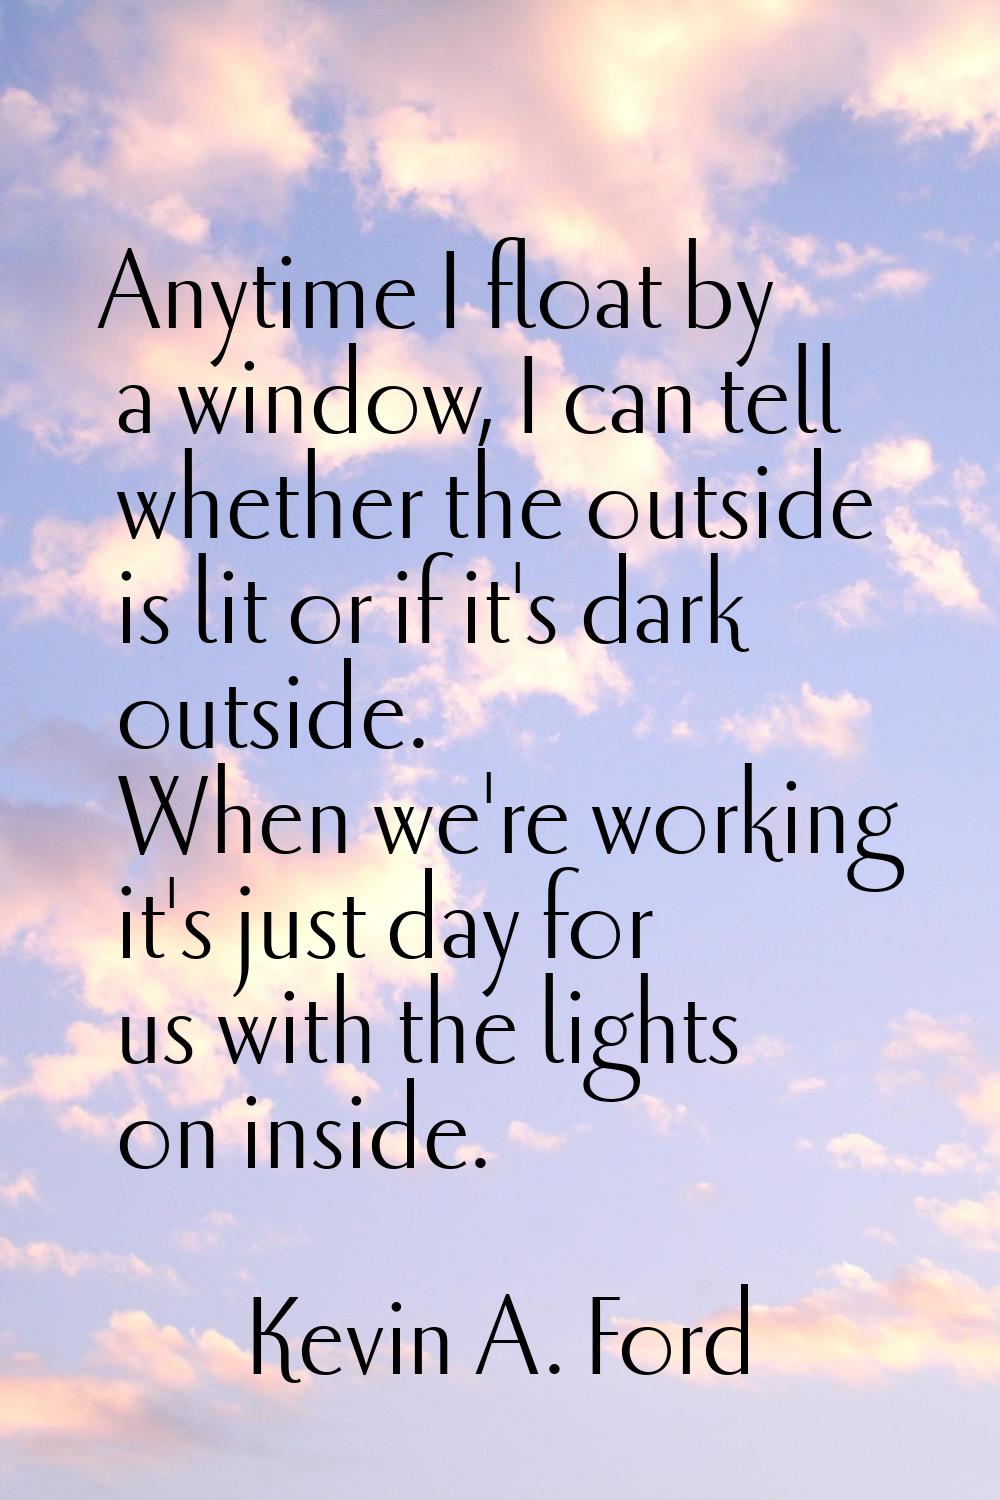 Anytime I float by a window, I can tell whether the outside is lit or if it's dark outside. When we